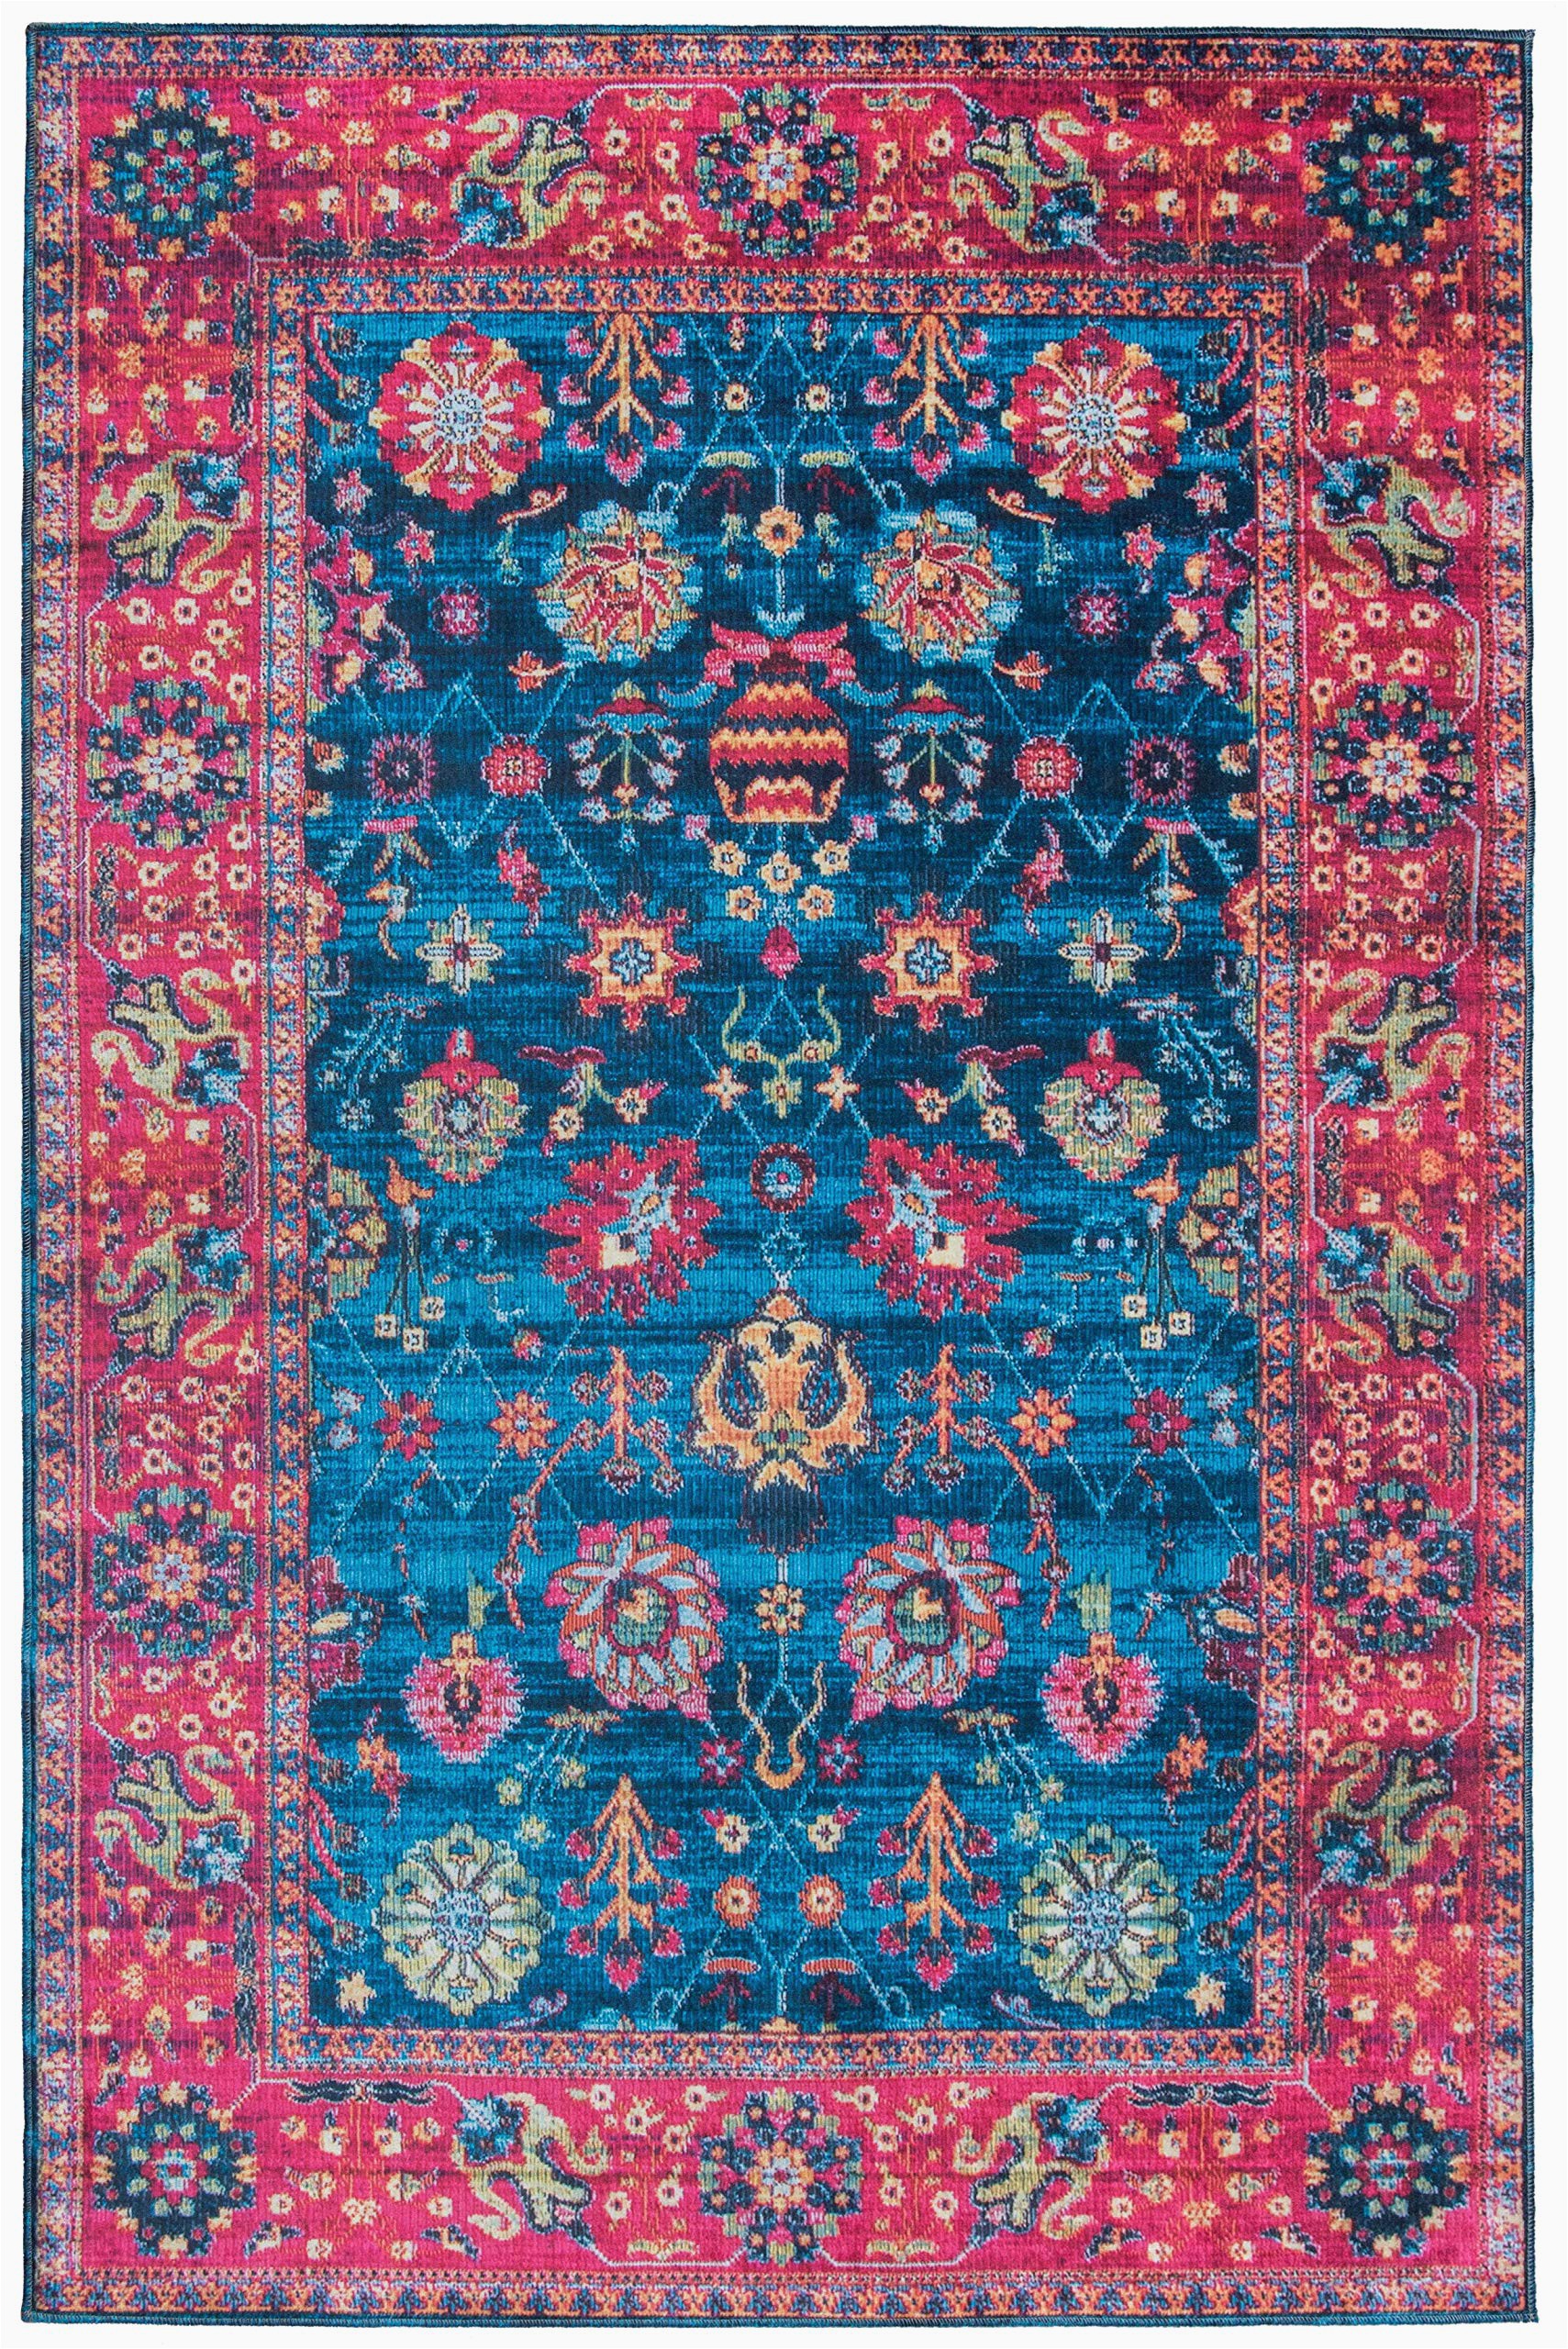 Machine Washable area Rugs 5×7 Mylife Rugs Traditional Vintage Non Slip Machine Washable Printed area Rug Blue Hot Pink 5 X7